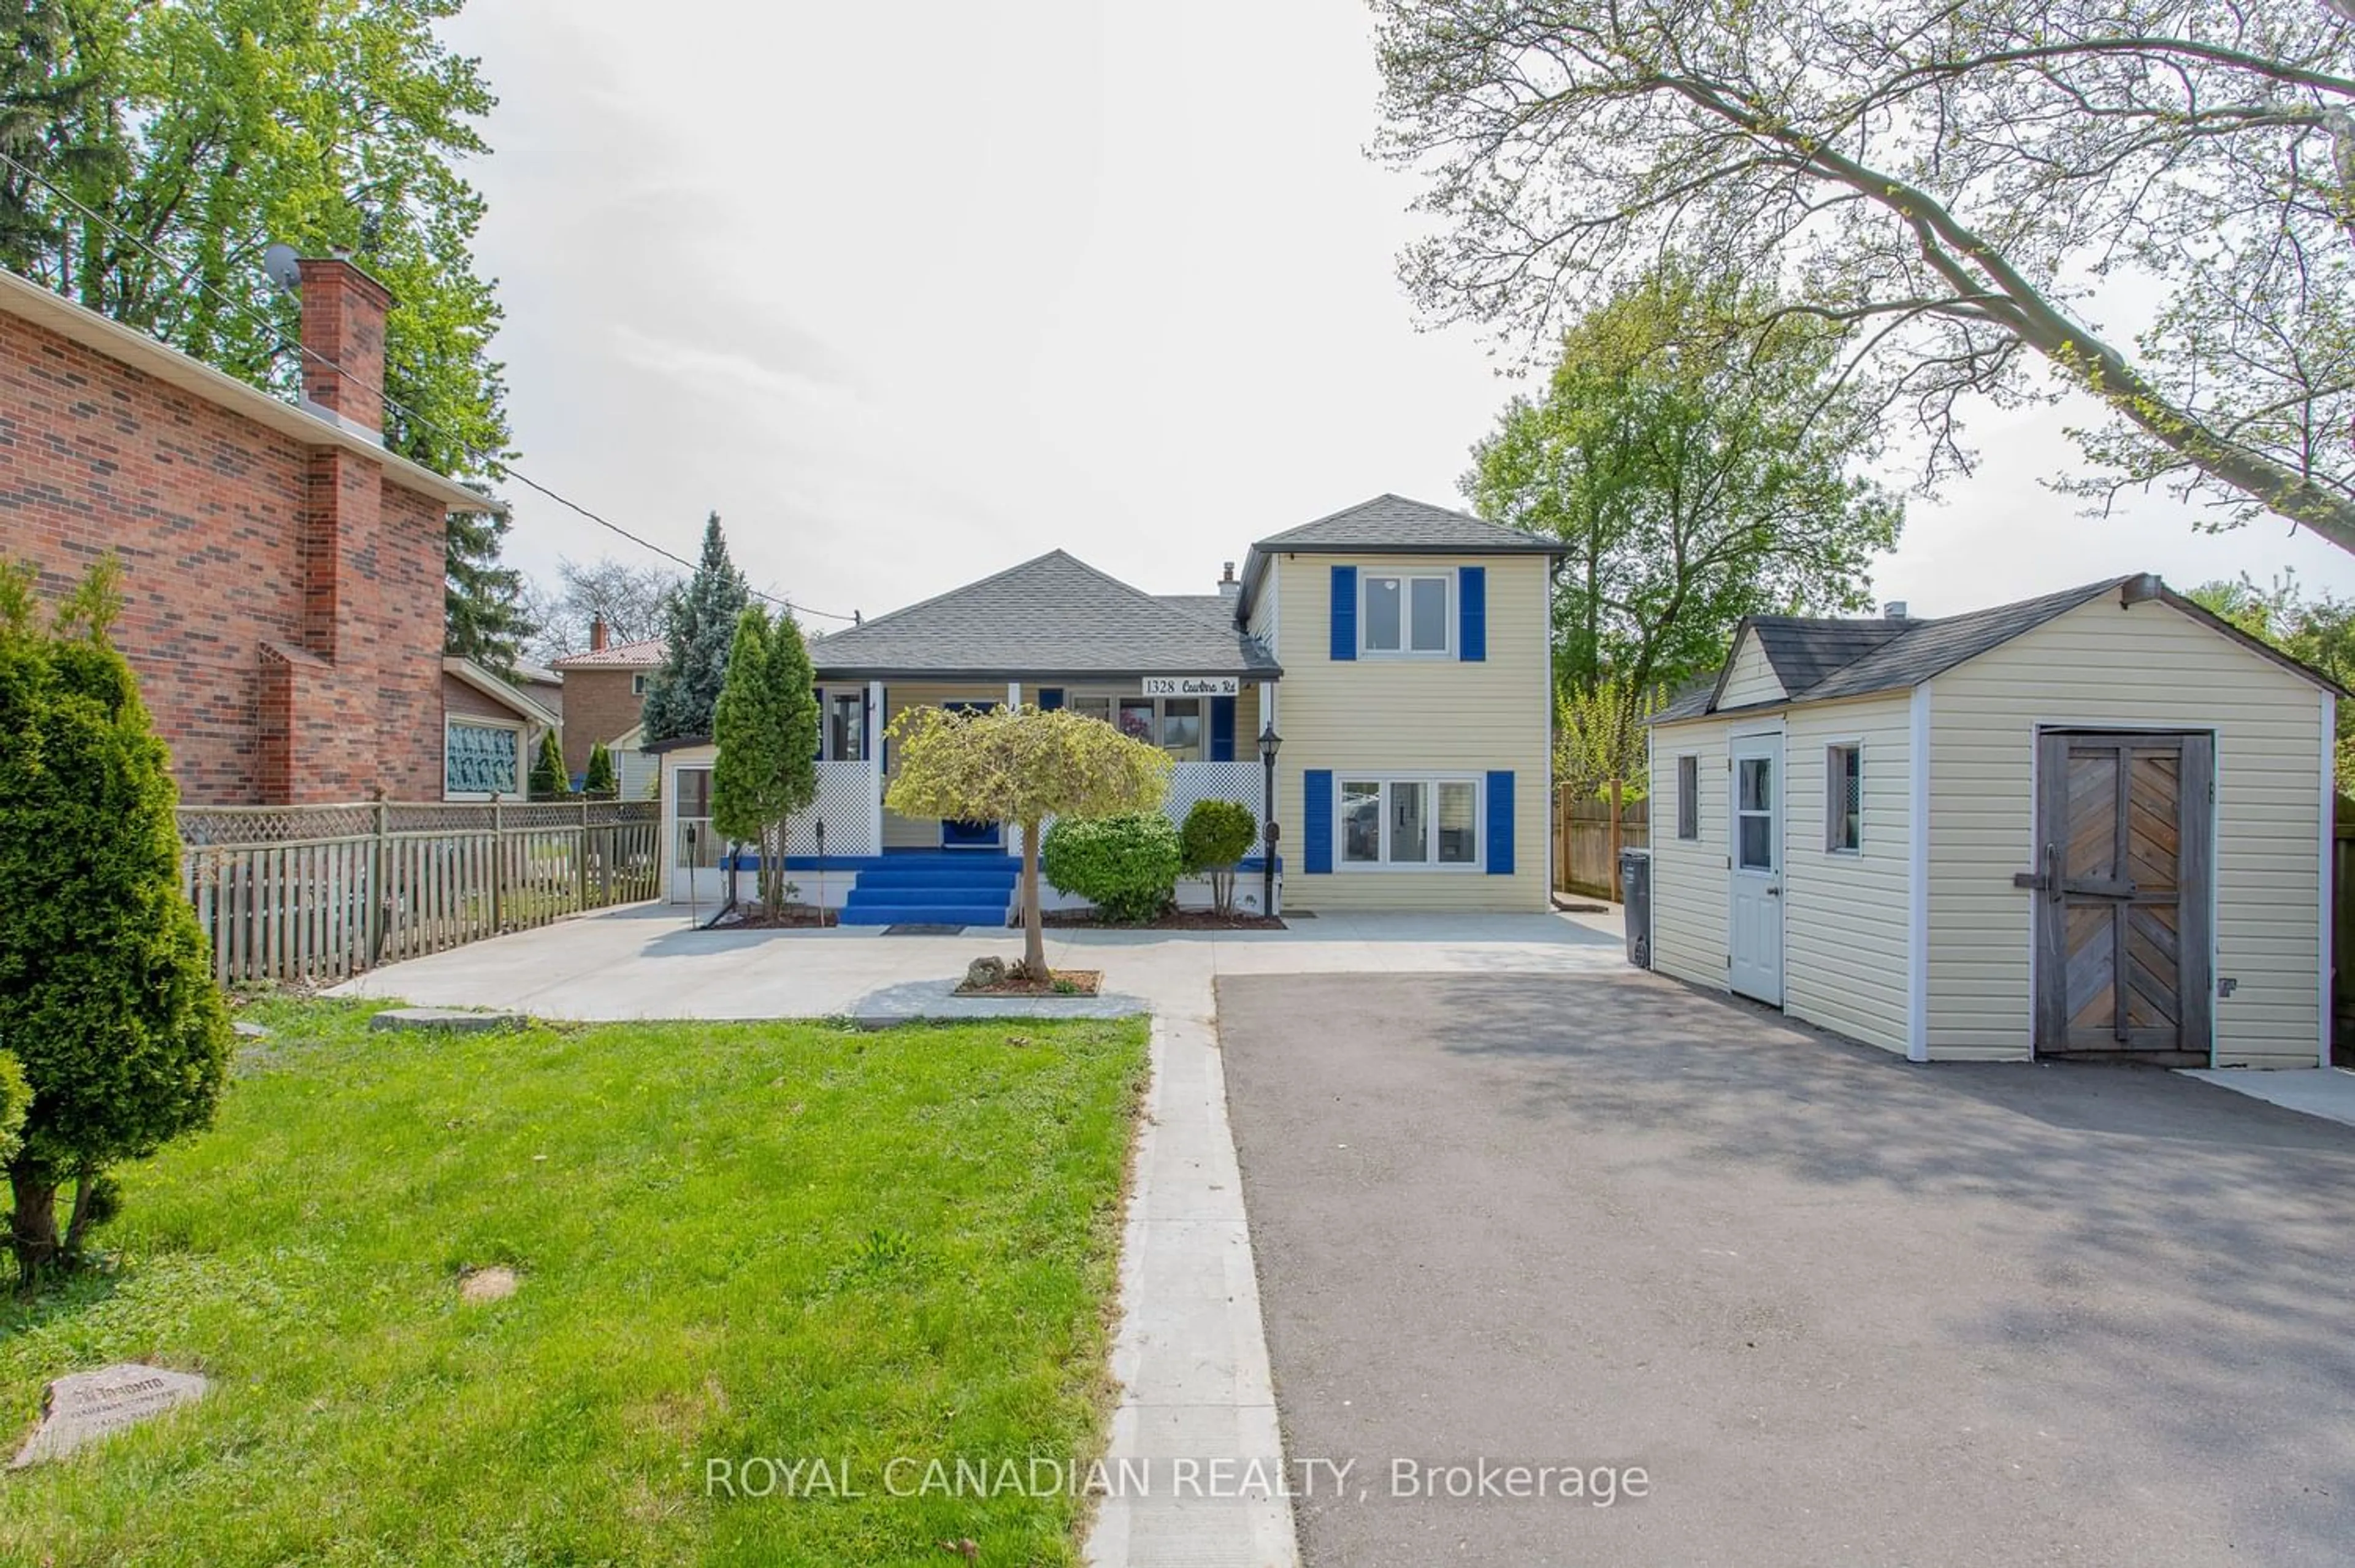 Frontside or backside of a home for 1328 Cawthra Rd, Mississauga Ontario L5G 4K9